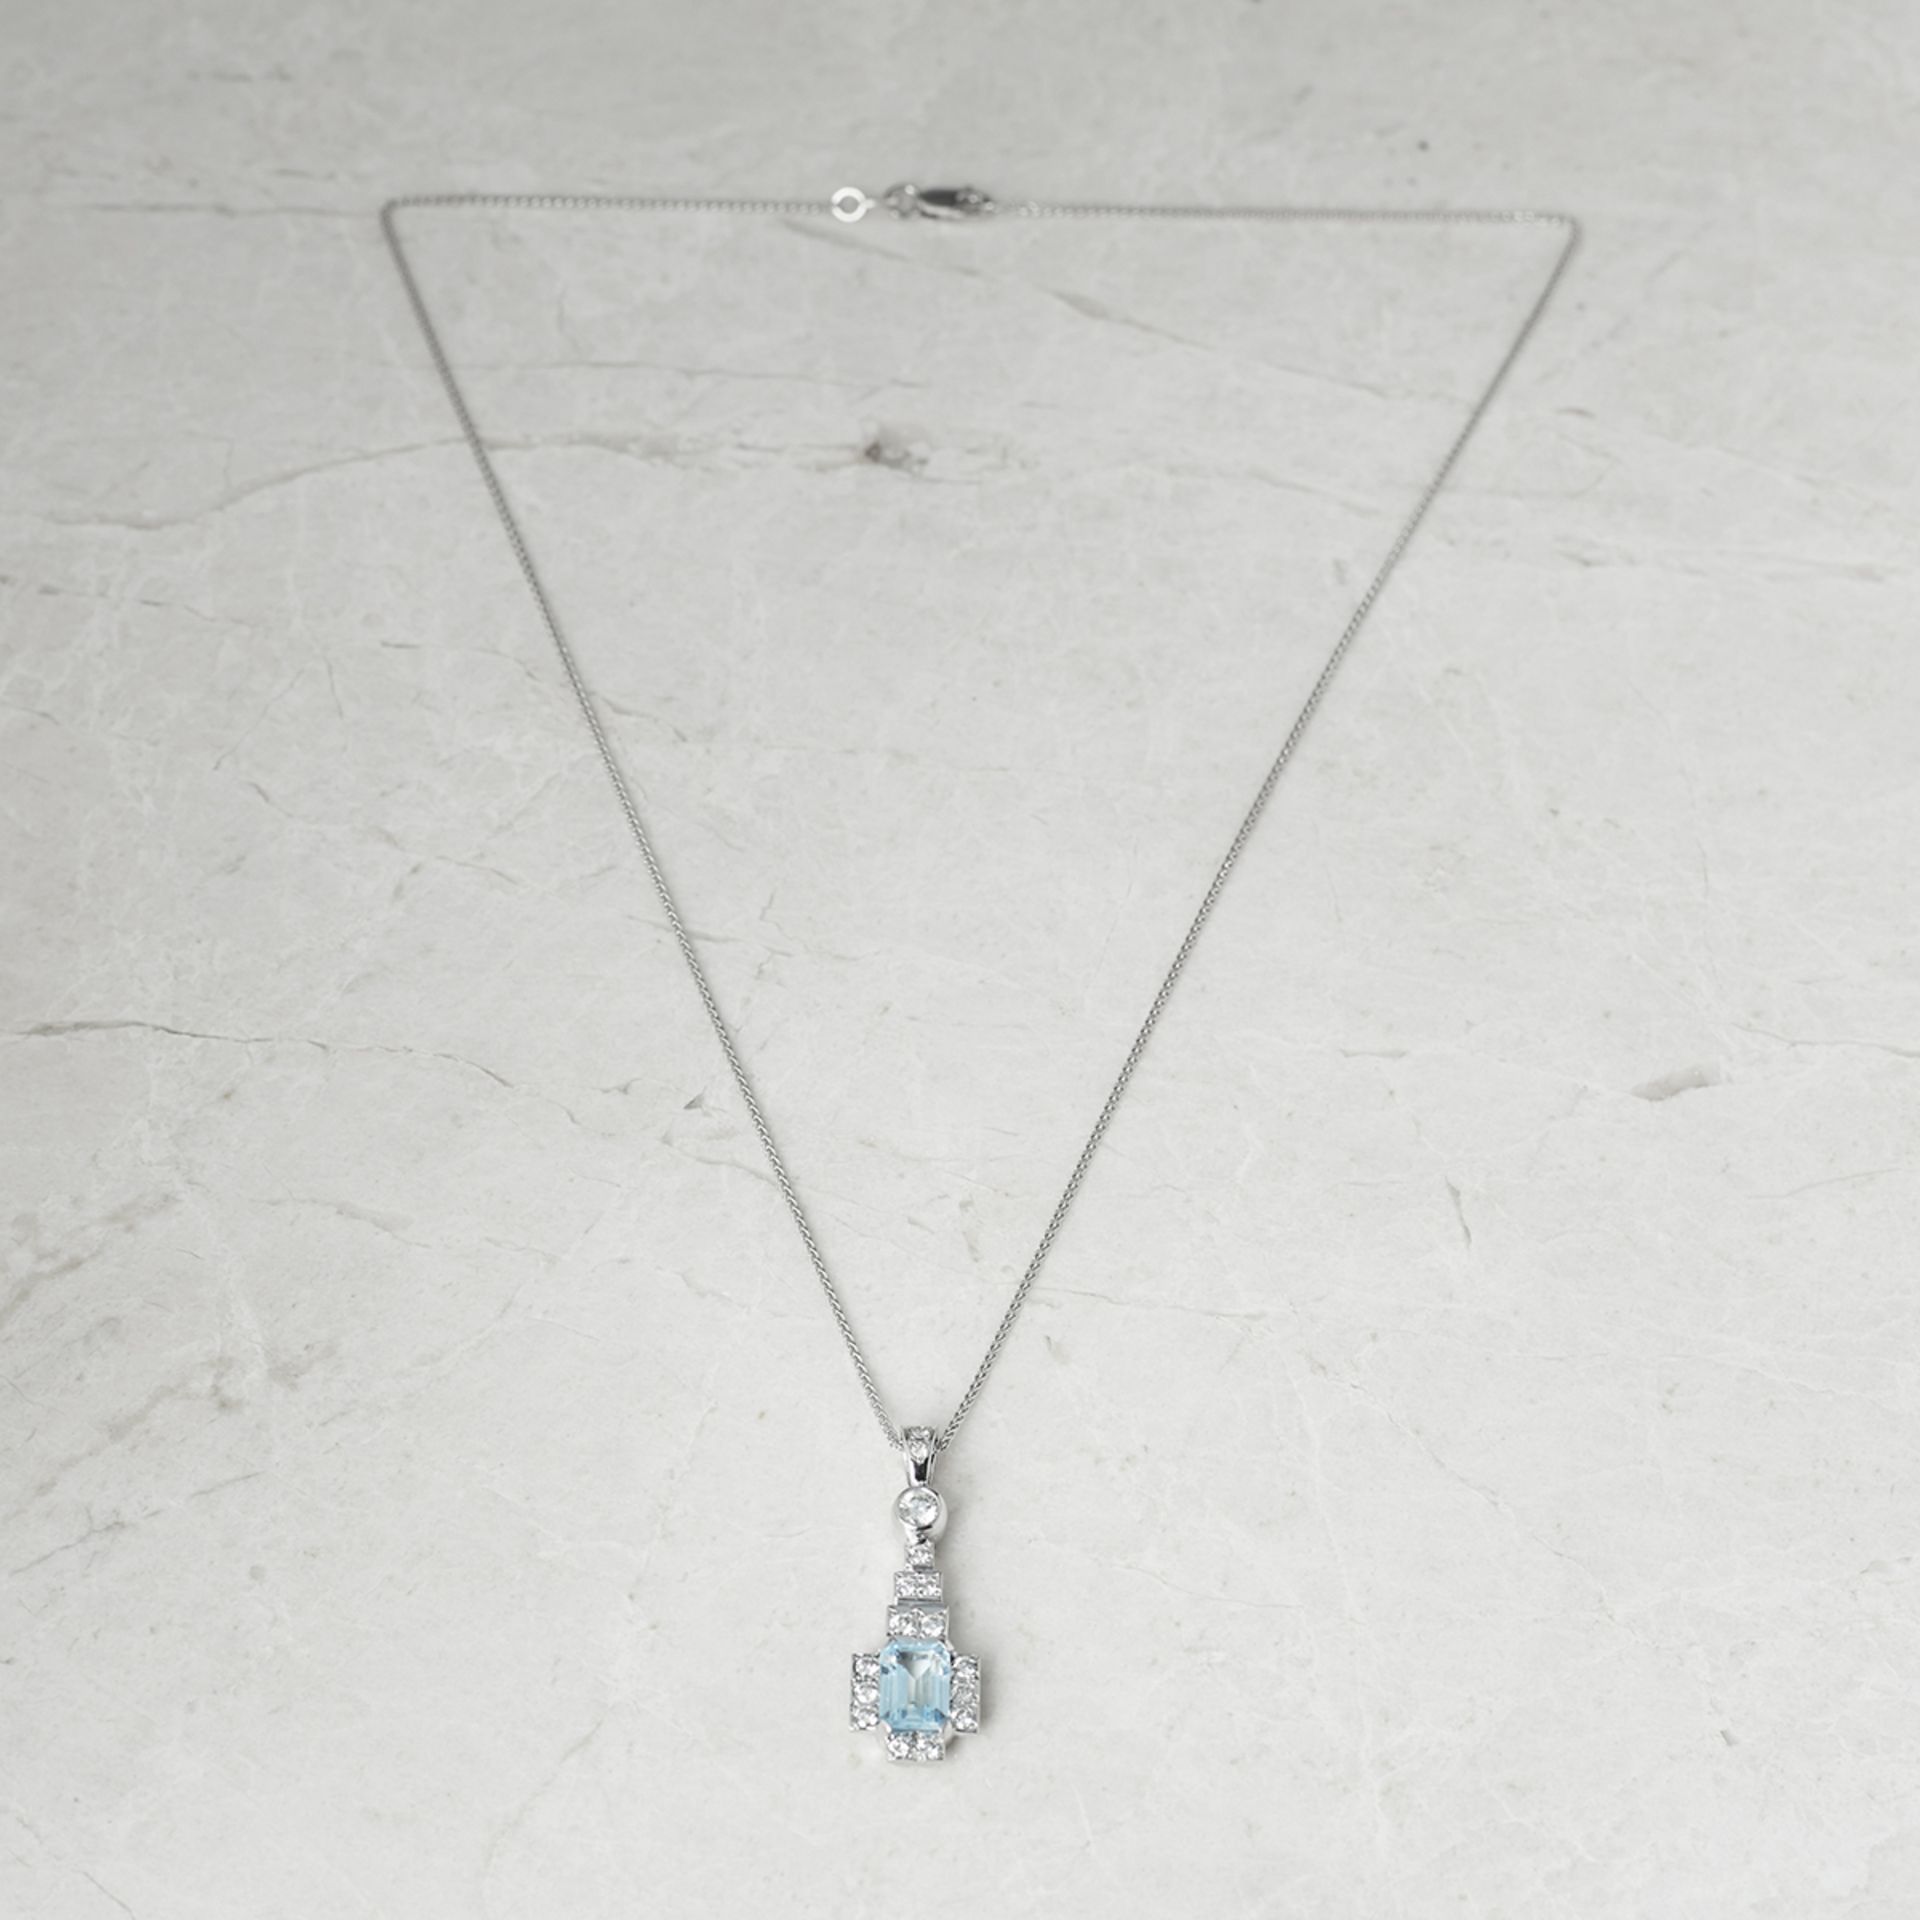 Unbranded, 18k White Gold 1.50ct Blue Topaz & 0.60ct Diamond Necklace - Image 6 of 6